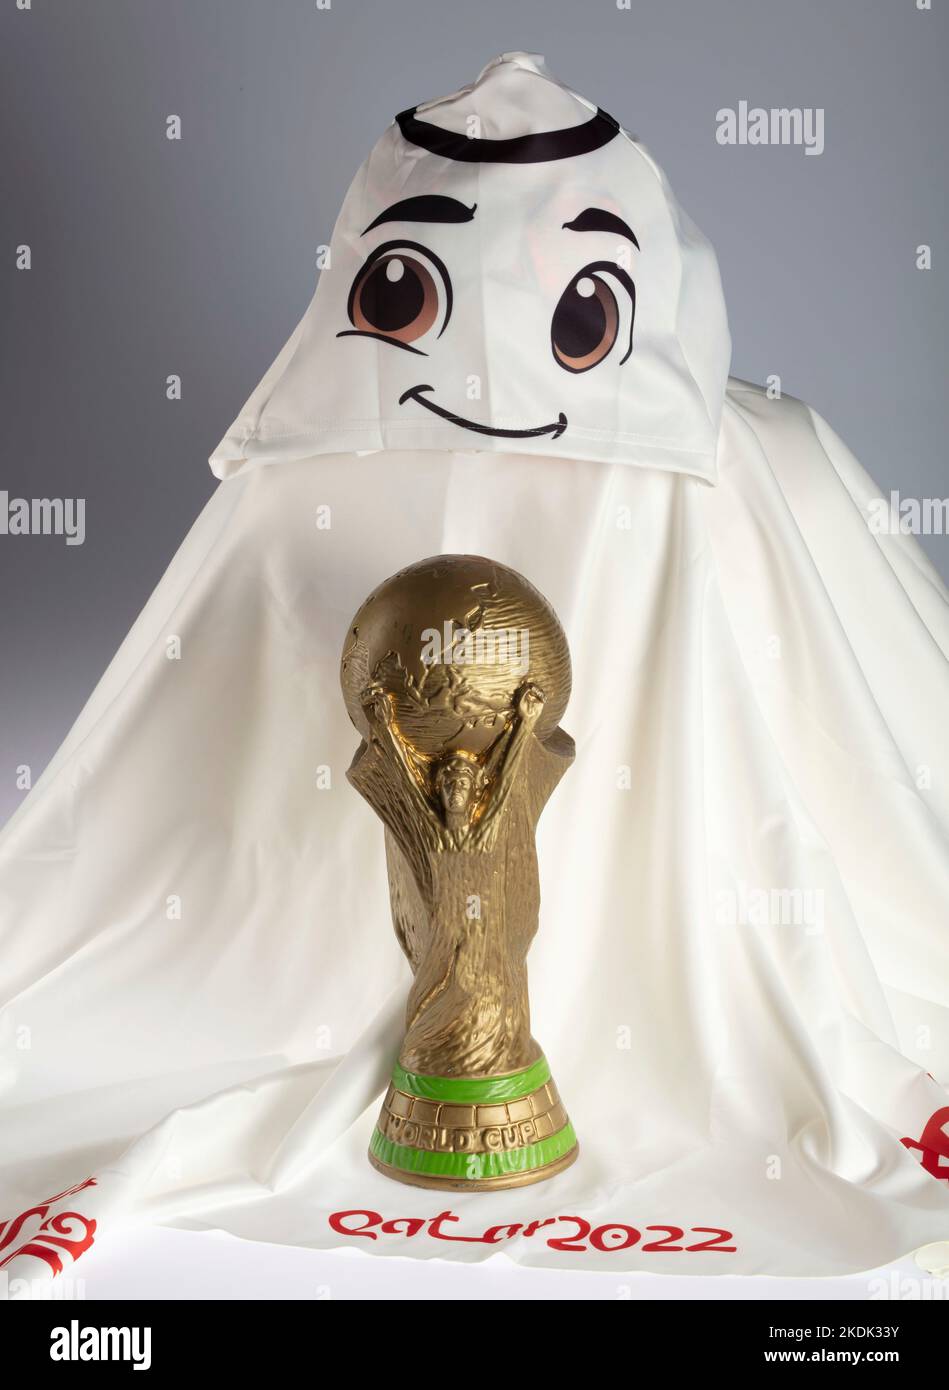 Meet the official mascot for the Qatar 2022 Fifa World Cup 